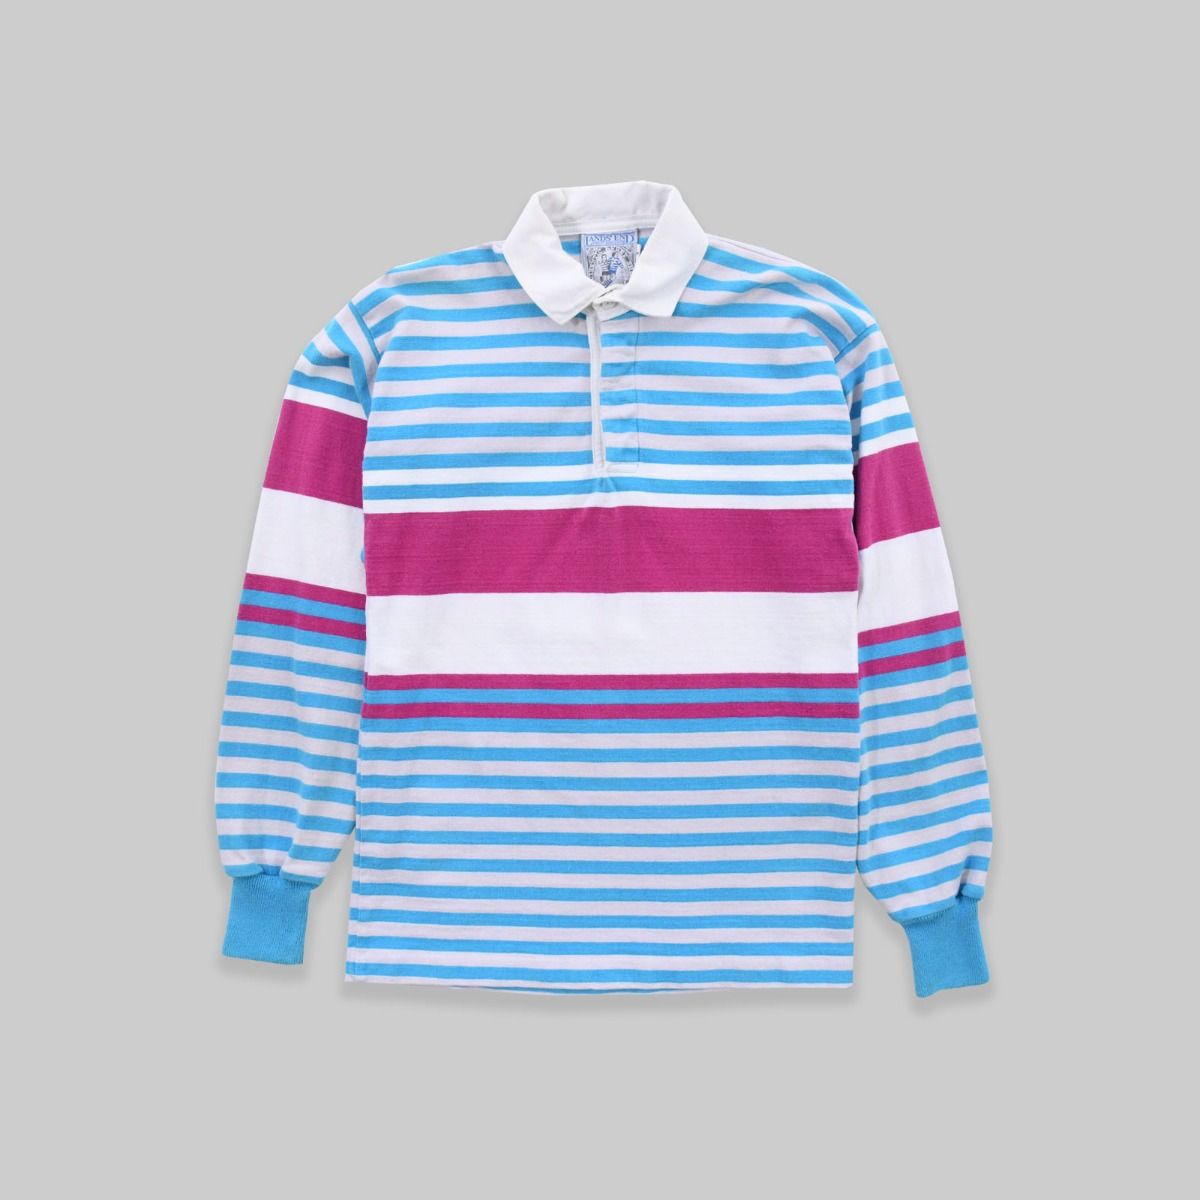 Land’s End Rugby Shirt